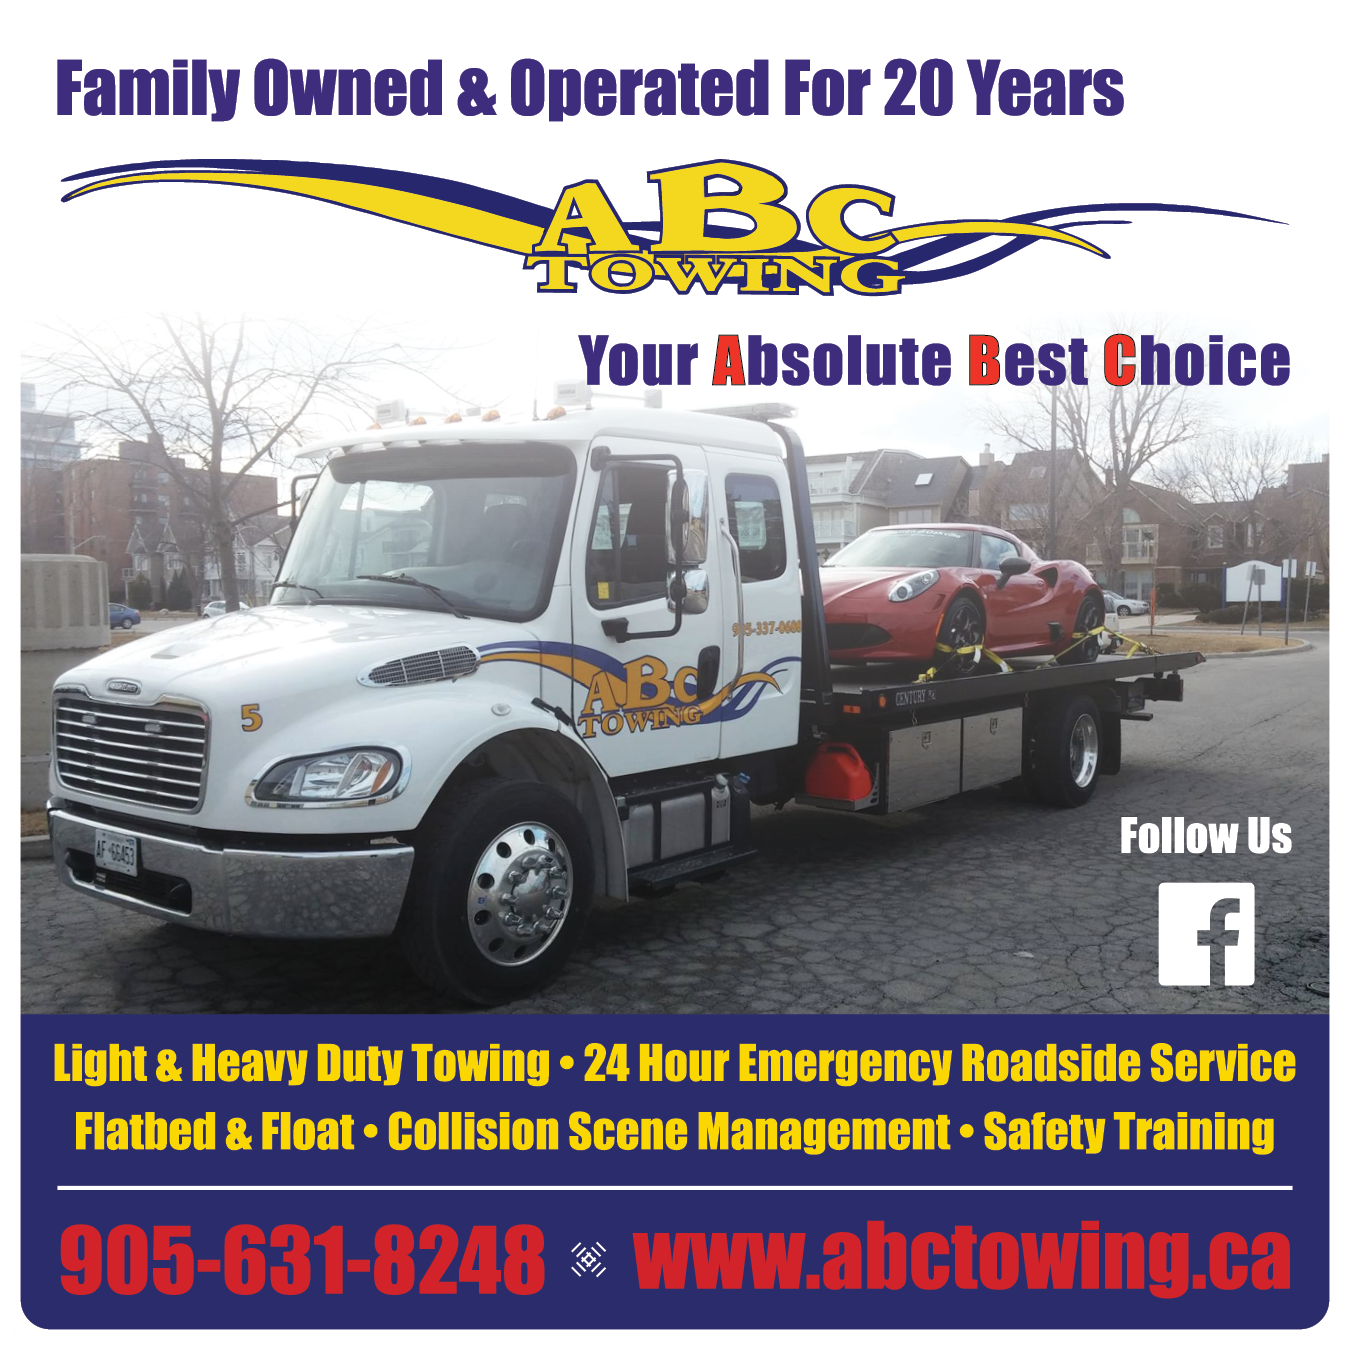 ABC Towing